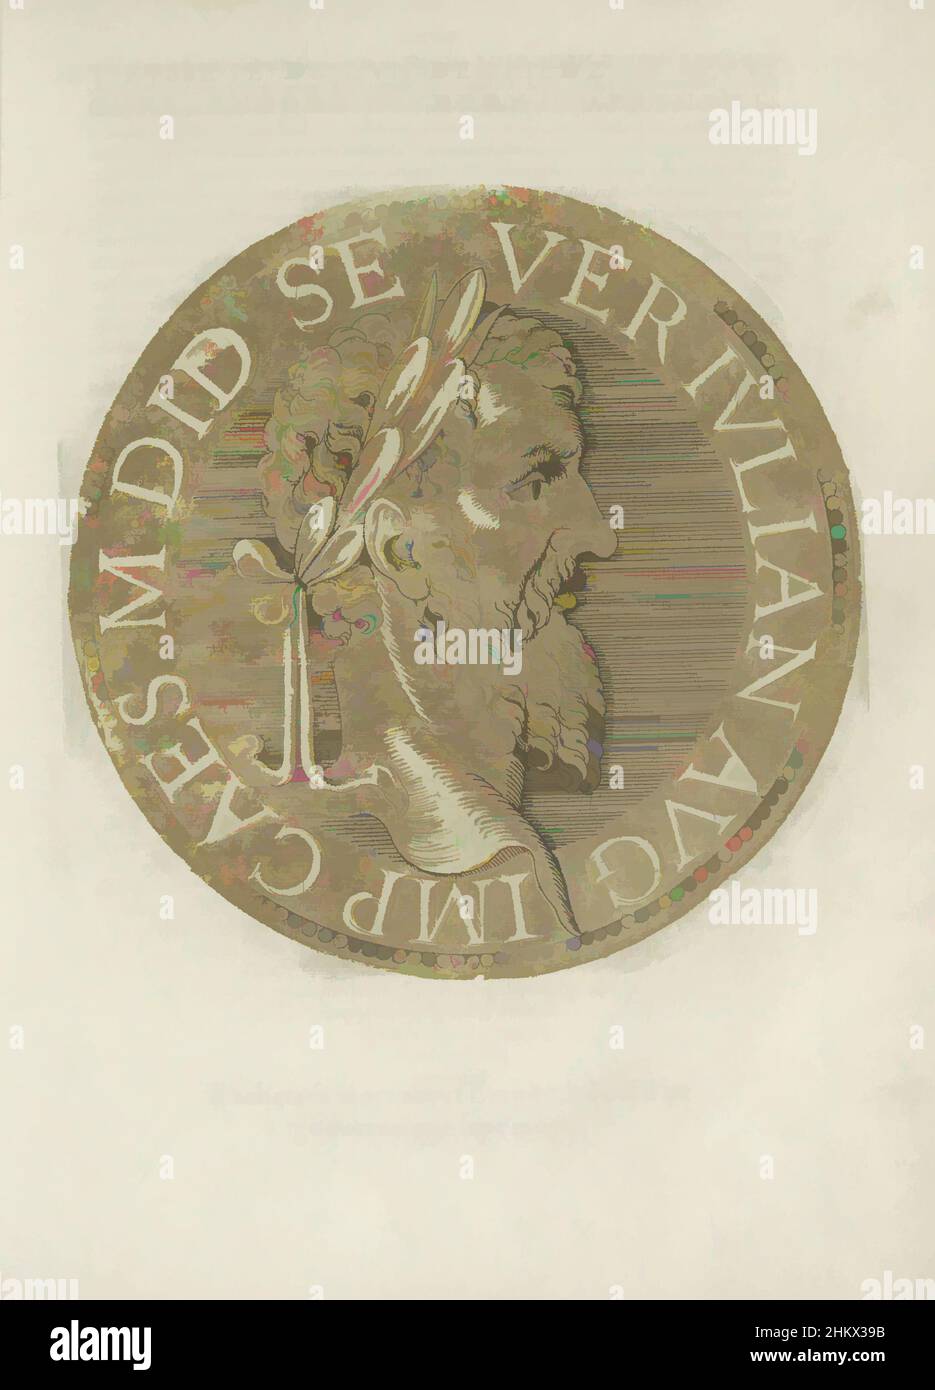 Art inspired by Portrait of Emperor Didius Julianus, Les images presque de tous les empereurs (series title), Portrait of Emperor Didius Julianus, on a coin with edge lettering. The print is part of a book on the emperors from Julius Caesar to Charles V and his brother Ferdinand., Joos, Classic works modernized by Artotop with a splash of modernity. Shapes, color and value, eye-catching visual impact on art. Emotions through freedom of artworks in a contemporary way. A timeless message pursuing a wildly creative new direction. Artists turning to the digital medium and creating the Artotop NFT Stock Photo